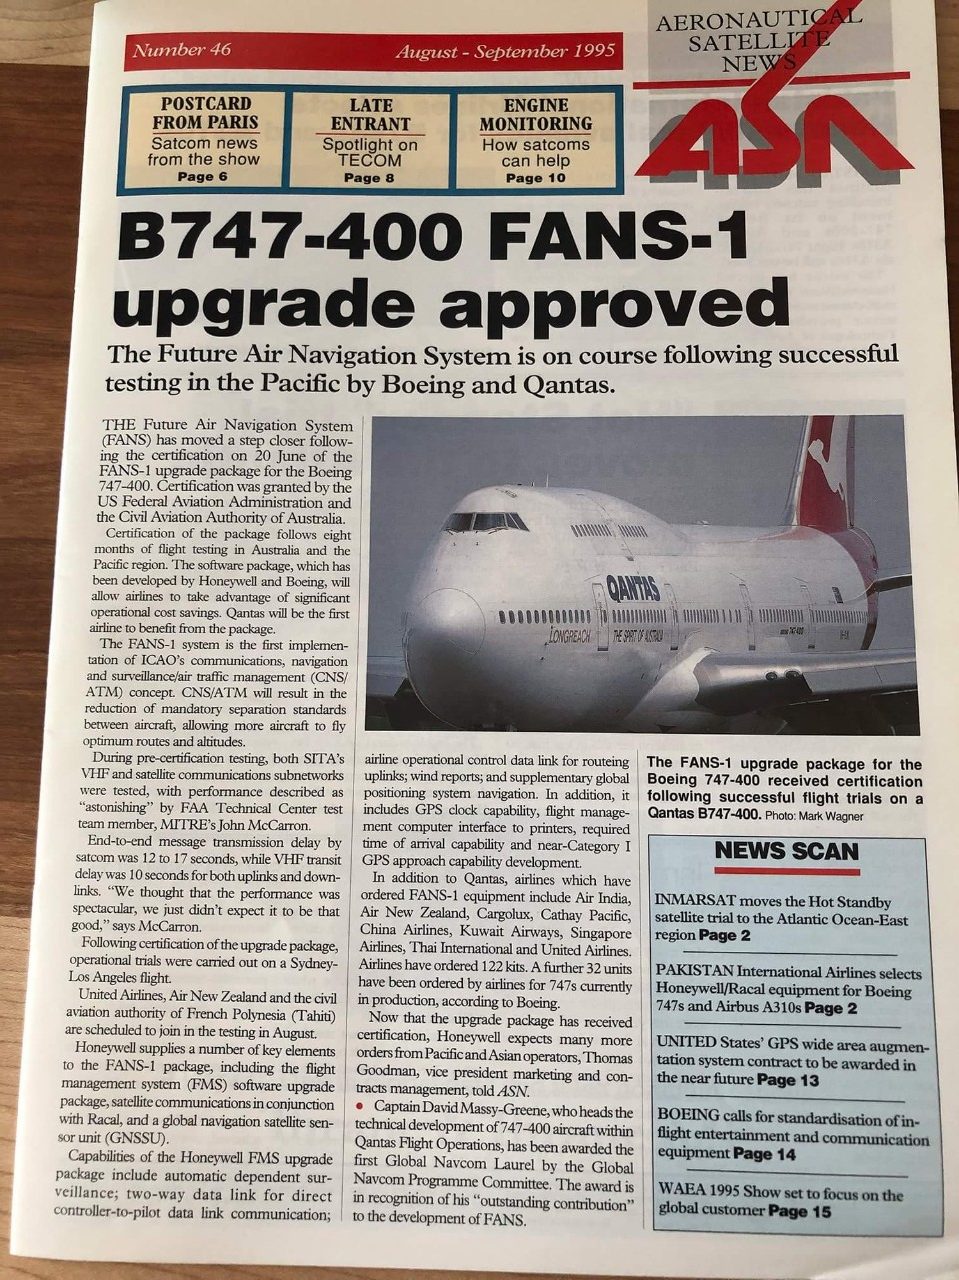 Aeronautical satellite news front cover looking at FANS-1